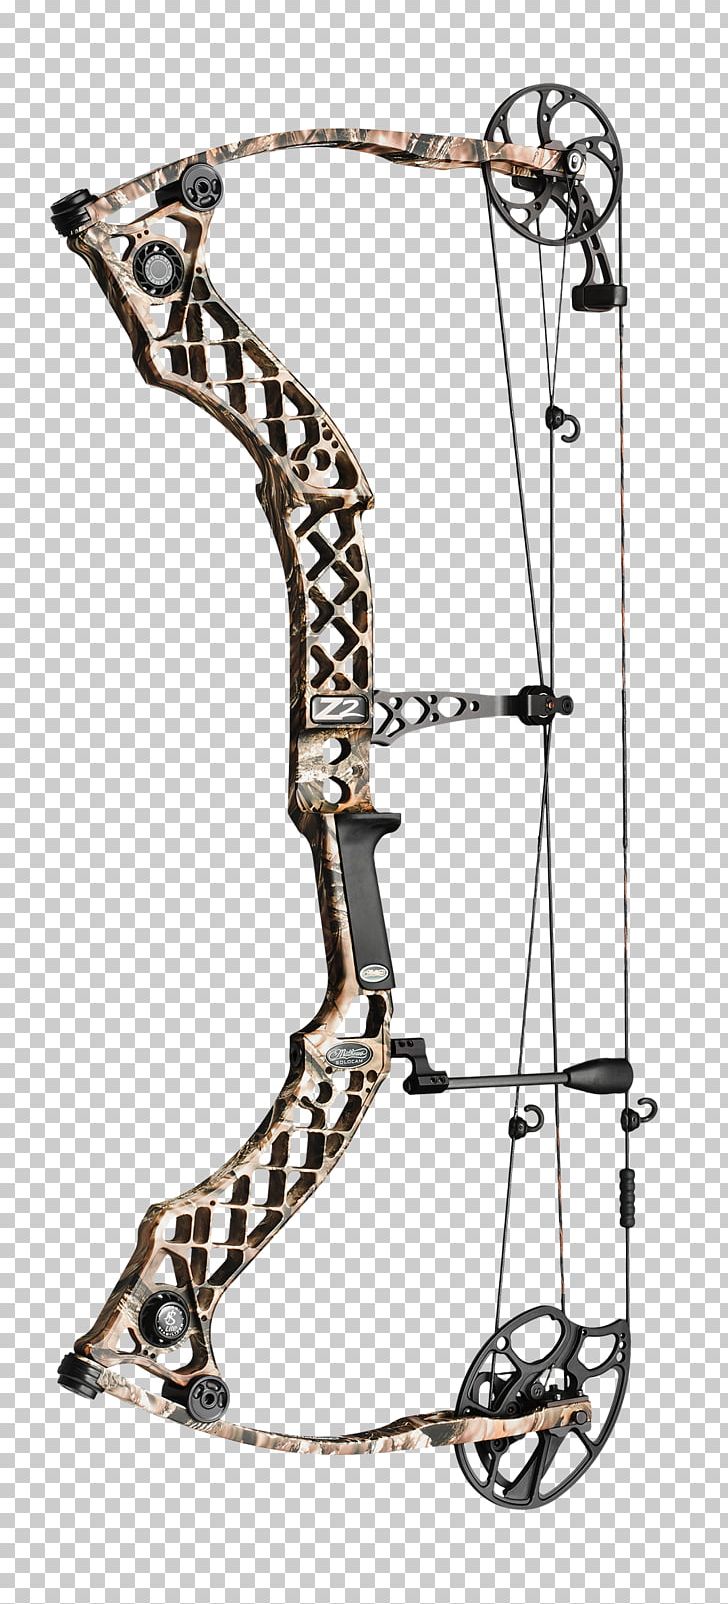 Compound Bows Archery Bow And Arrow Bowhunting PNG, Clipart, Advanced Archery, Archery, Bear Archery, Bow, Bow And Arrow Free PNG Download